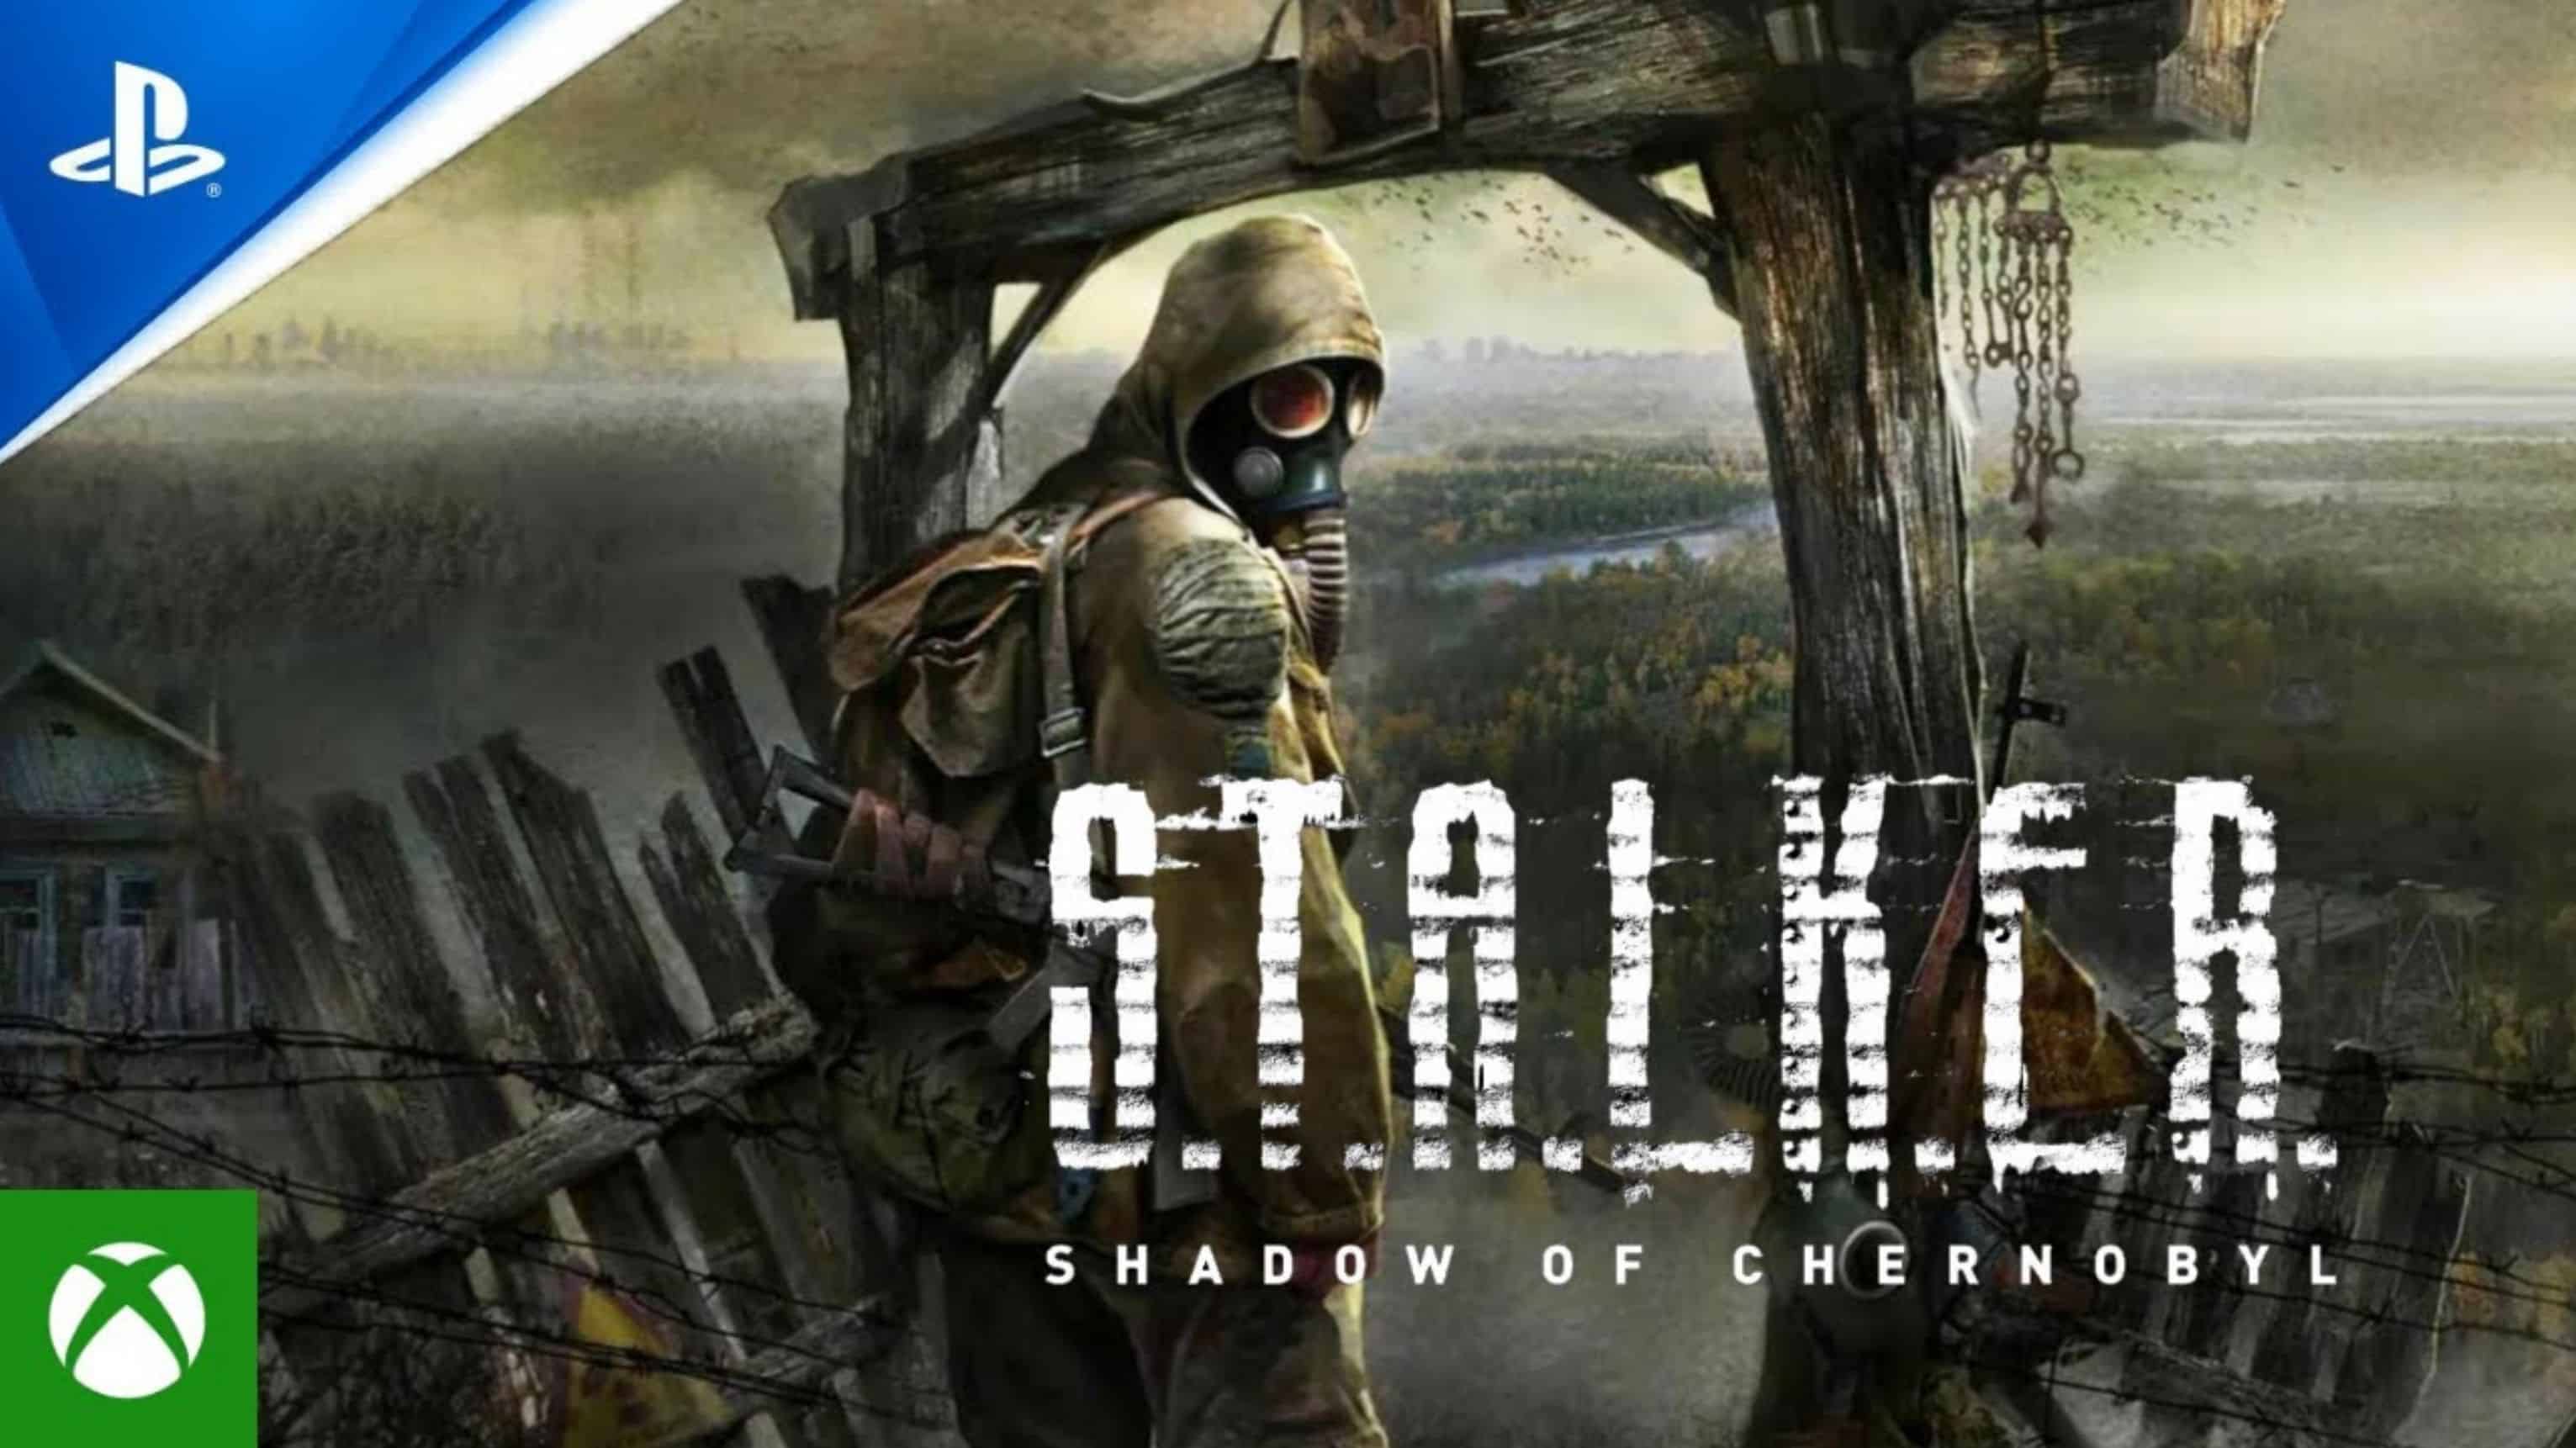 Stalker 2 Is Officially Running On Unreal Engine 5 : r/PS5